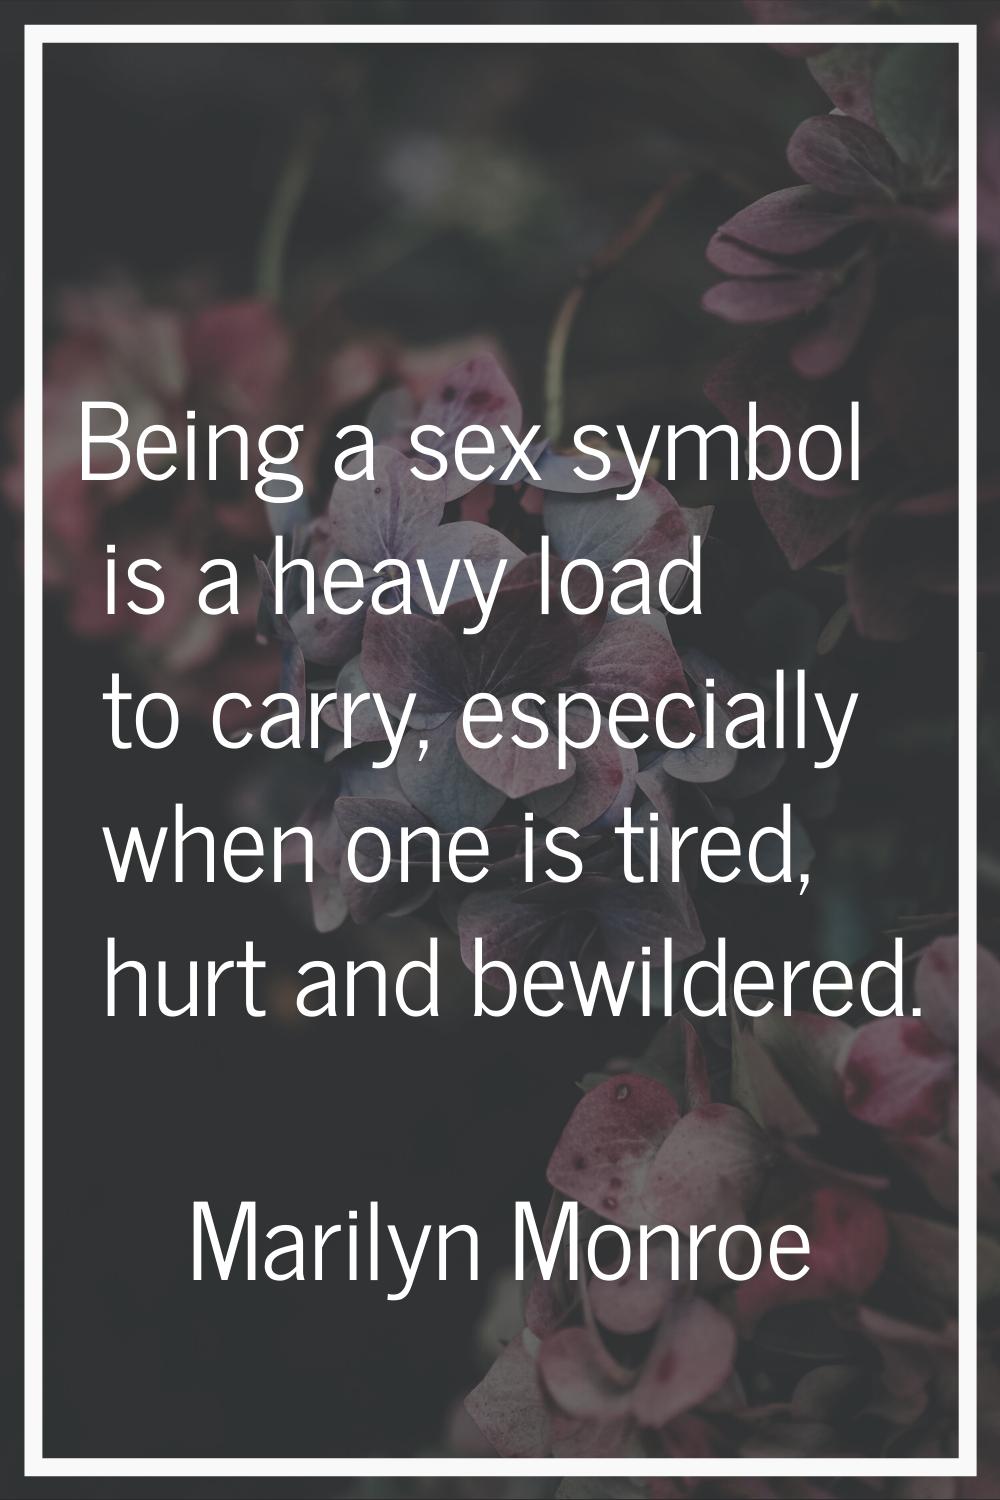 Being a sex symbol is a heavy load to carry, especially when one is tired, hurt and bewildered.